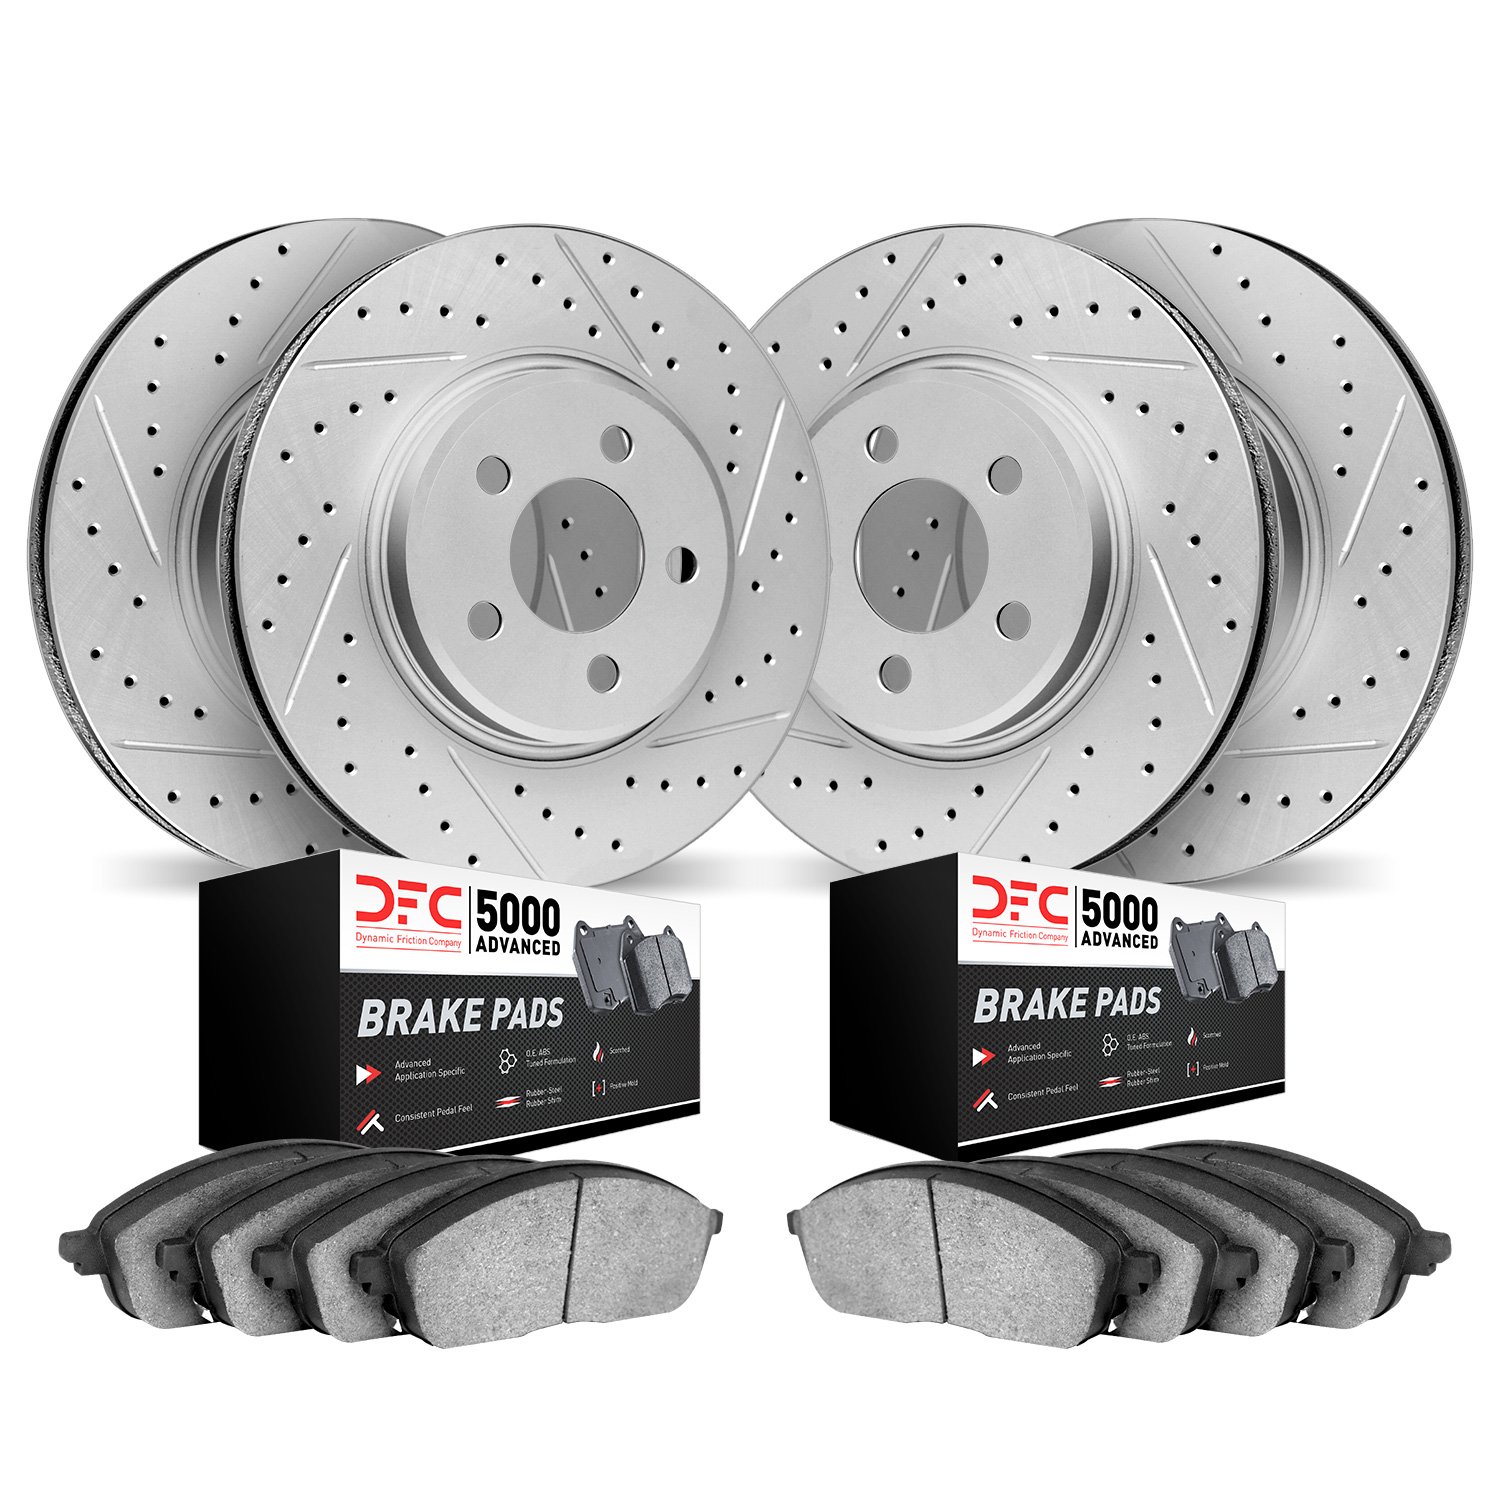 2504-63009 Geoperformance Drilled/Slotted Rotors w/5000 Advanced Brake Pads Kit, 2017-2019 Mercedes-Benz, Position: Front and Re